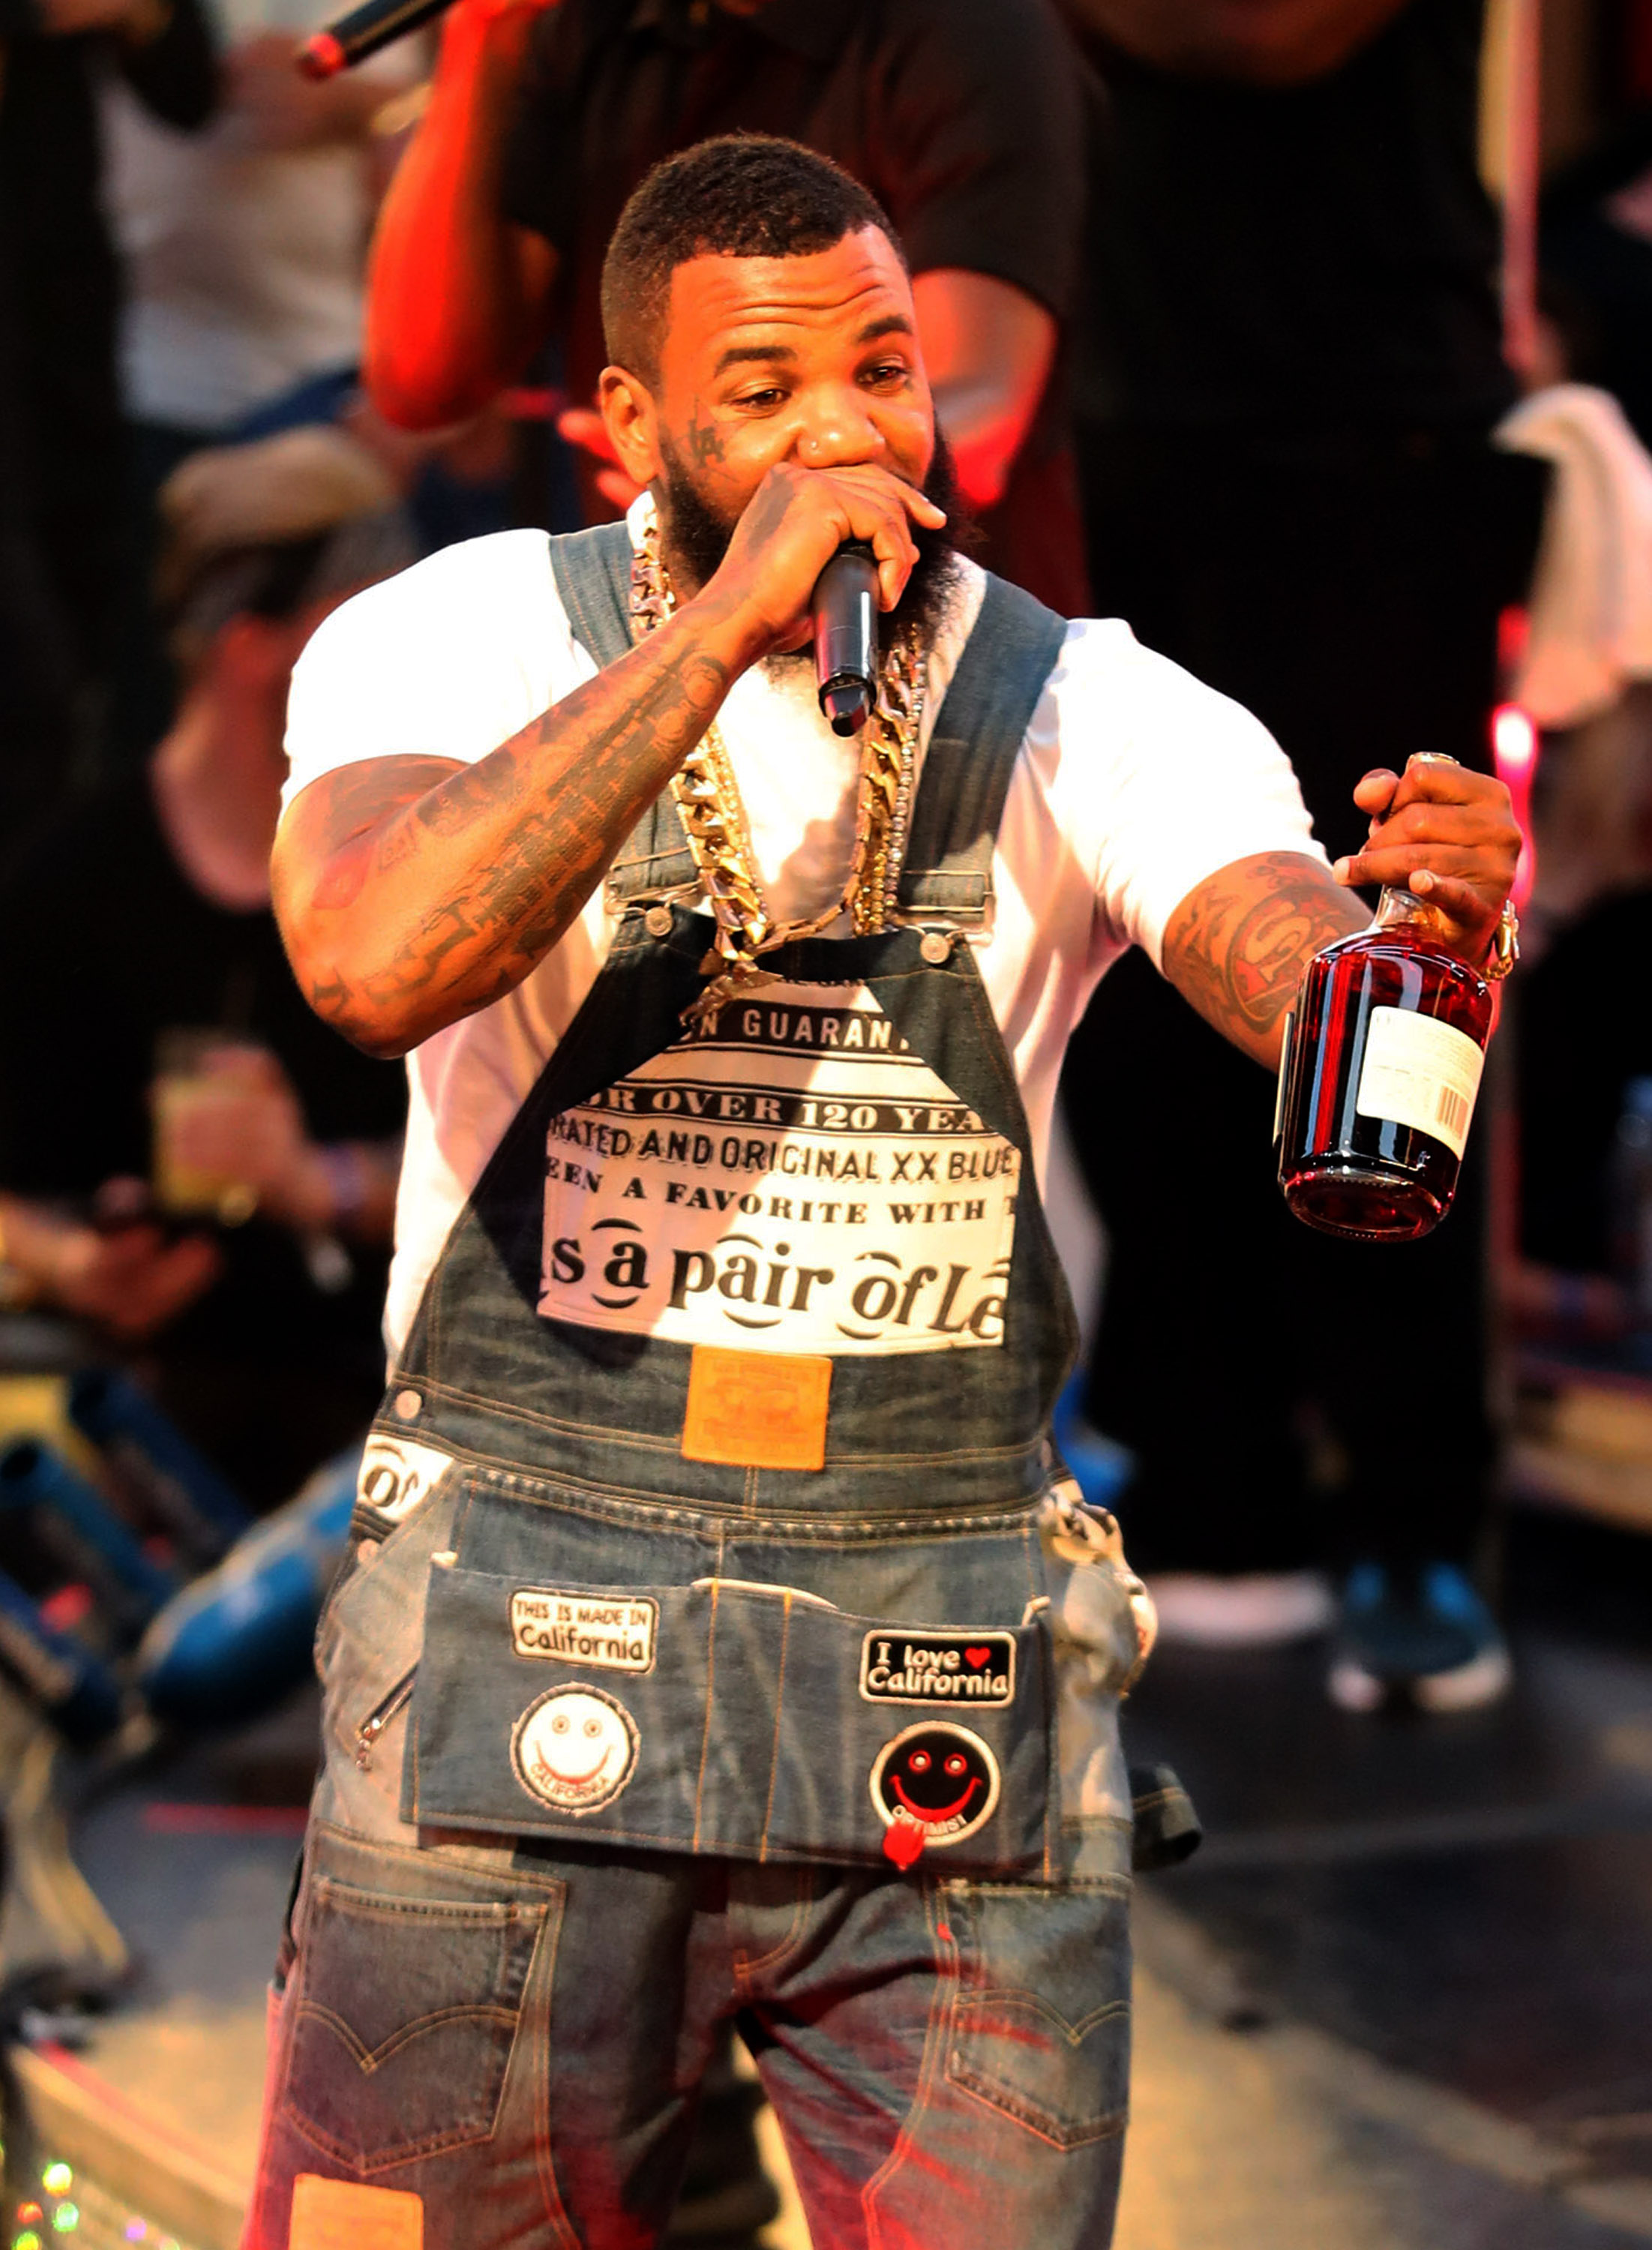 Rapper The Game Performs at Drais